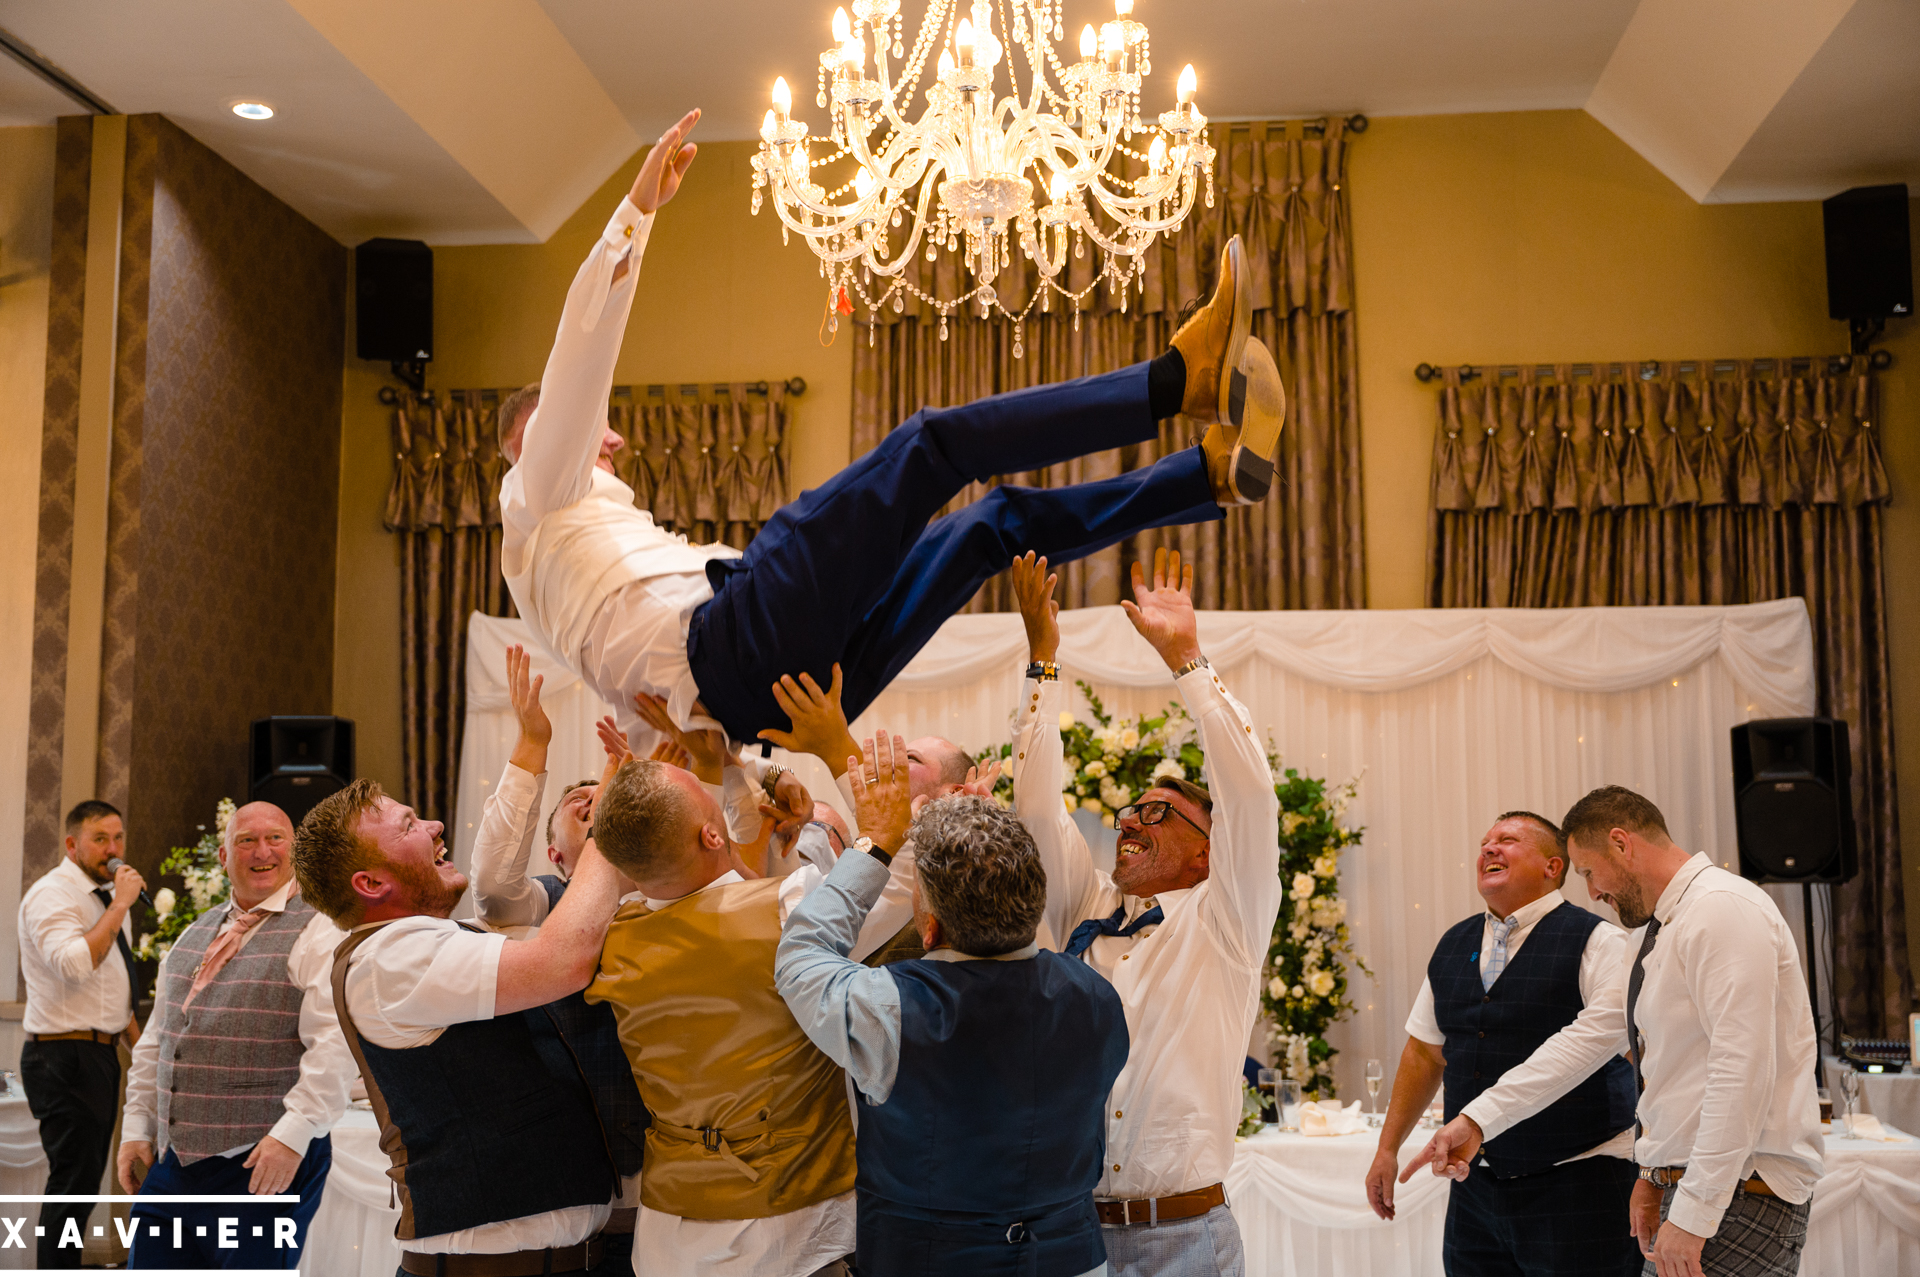 the groom is being thrown in the air by the guests